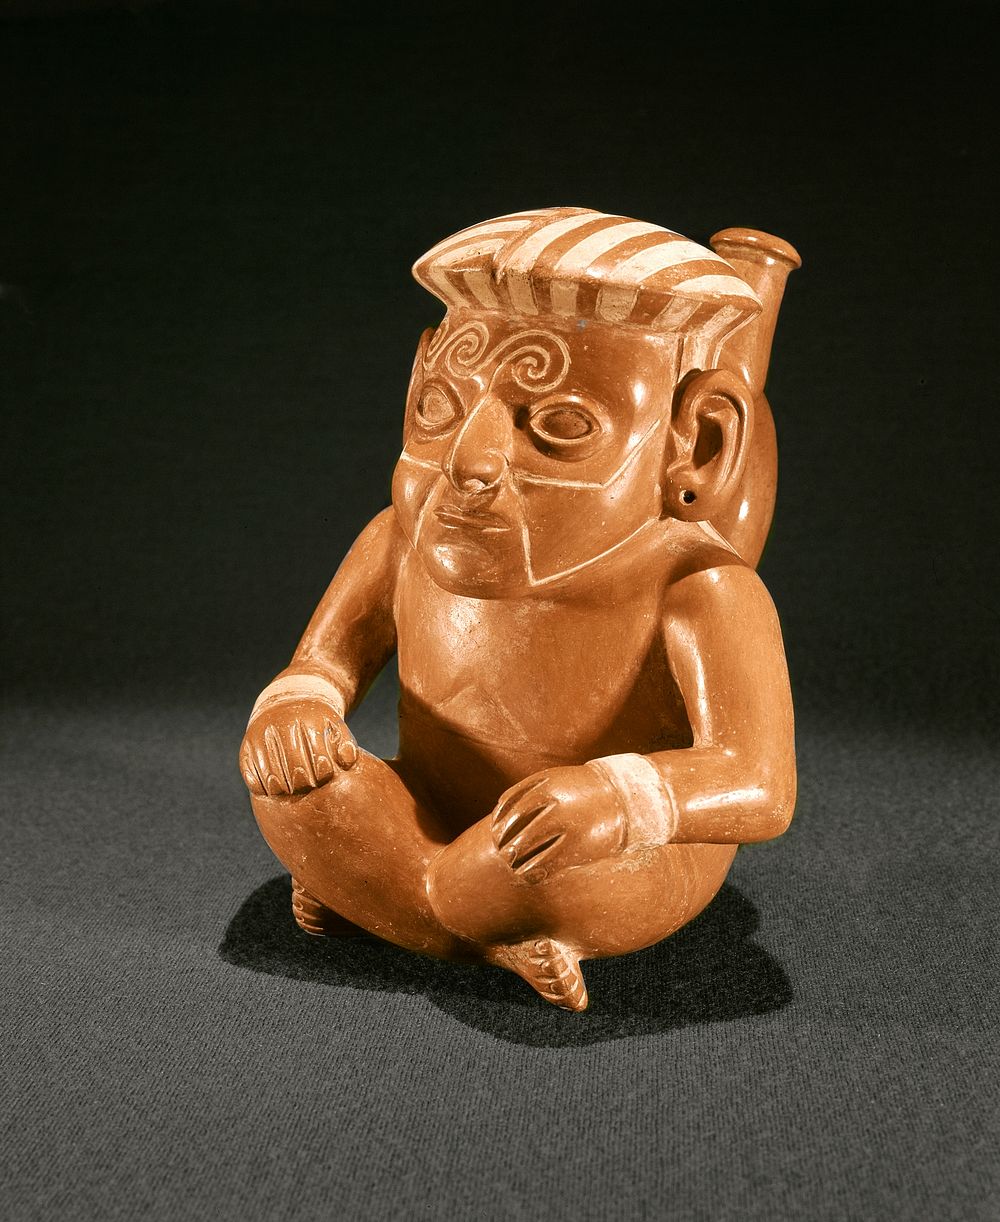 Stirrup Spout Vessel in the Form of a Seated Male Figure